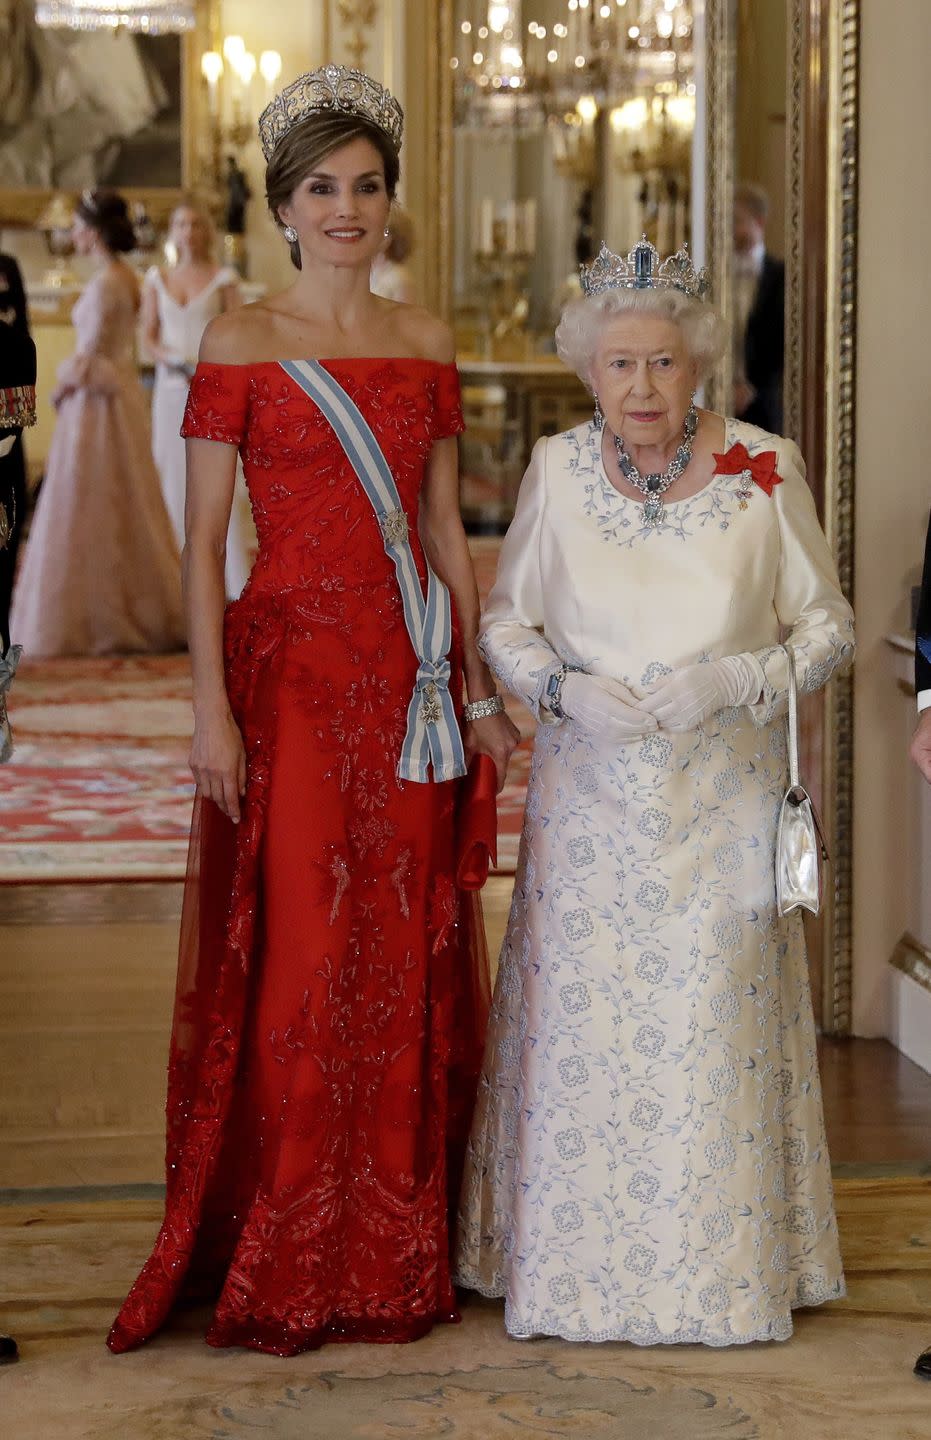 <p>King Felipe and Queen Letizia of Spain embarked on a state visit to the United Kingdom in 2017. Queen Elizabeth hosted the royals for an official state banquet at Buckingham Palace. Letizia wore a striking off-the-shoulder dress with a gorgeous tiara, while the Queen wore a white embroidered gown also with an equally impressive tiara. </p>